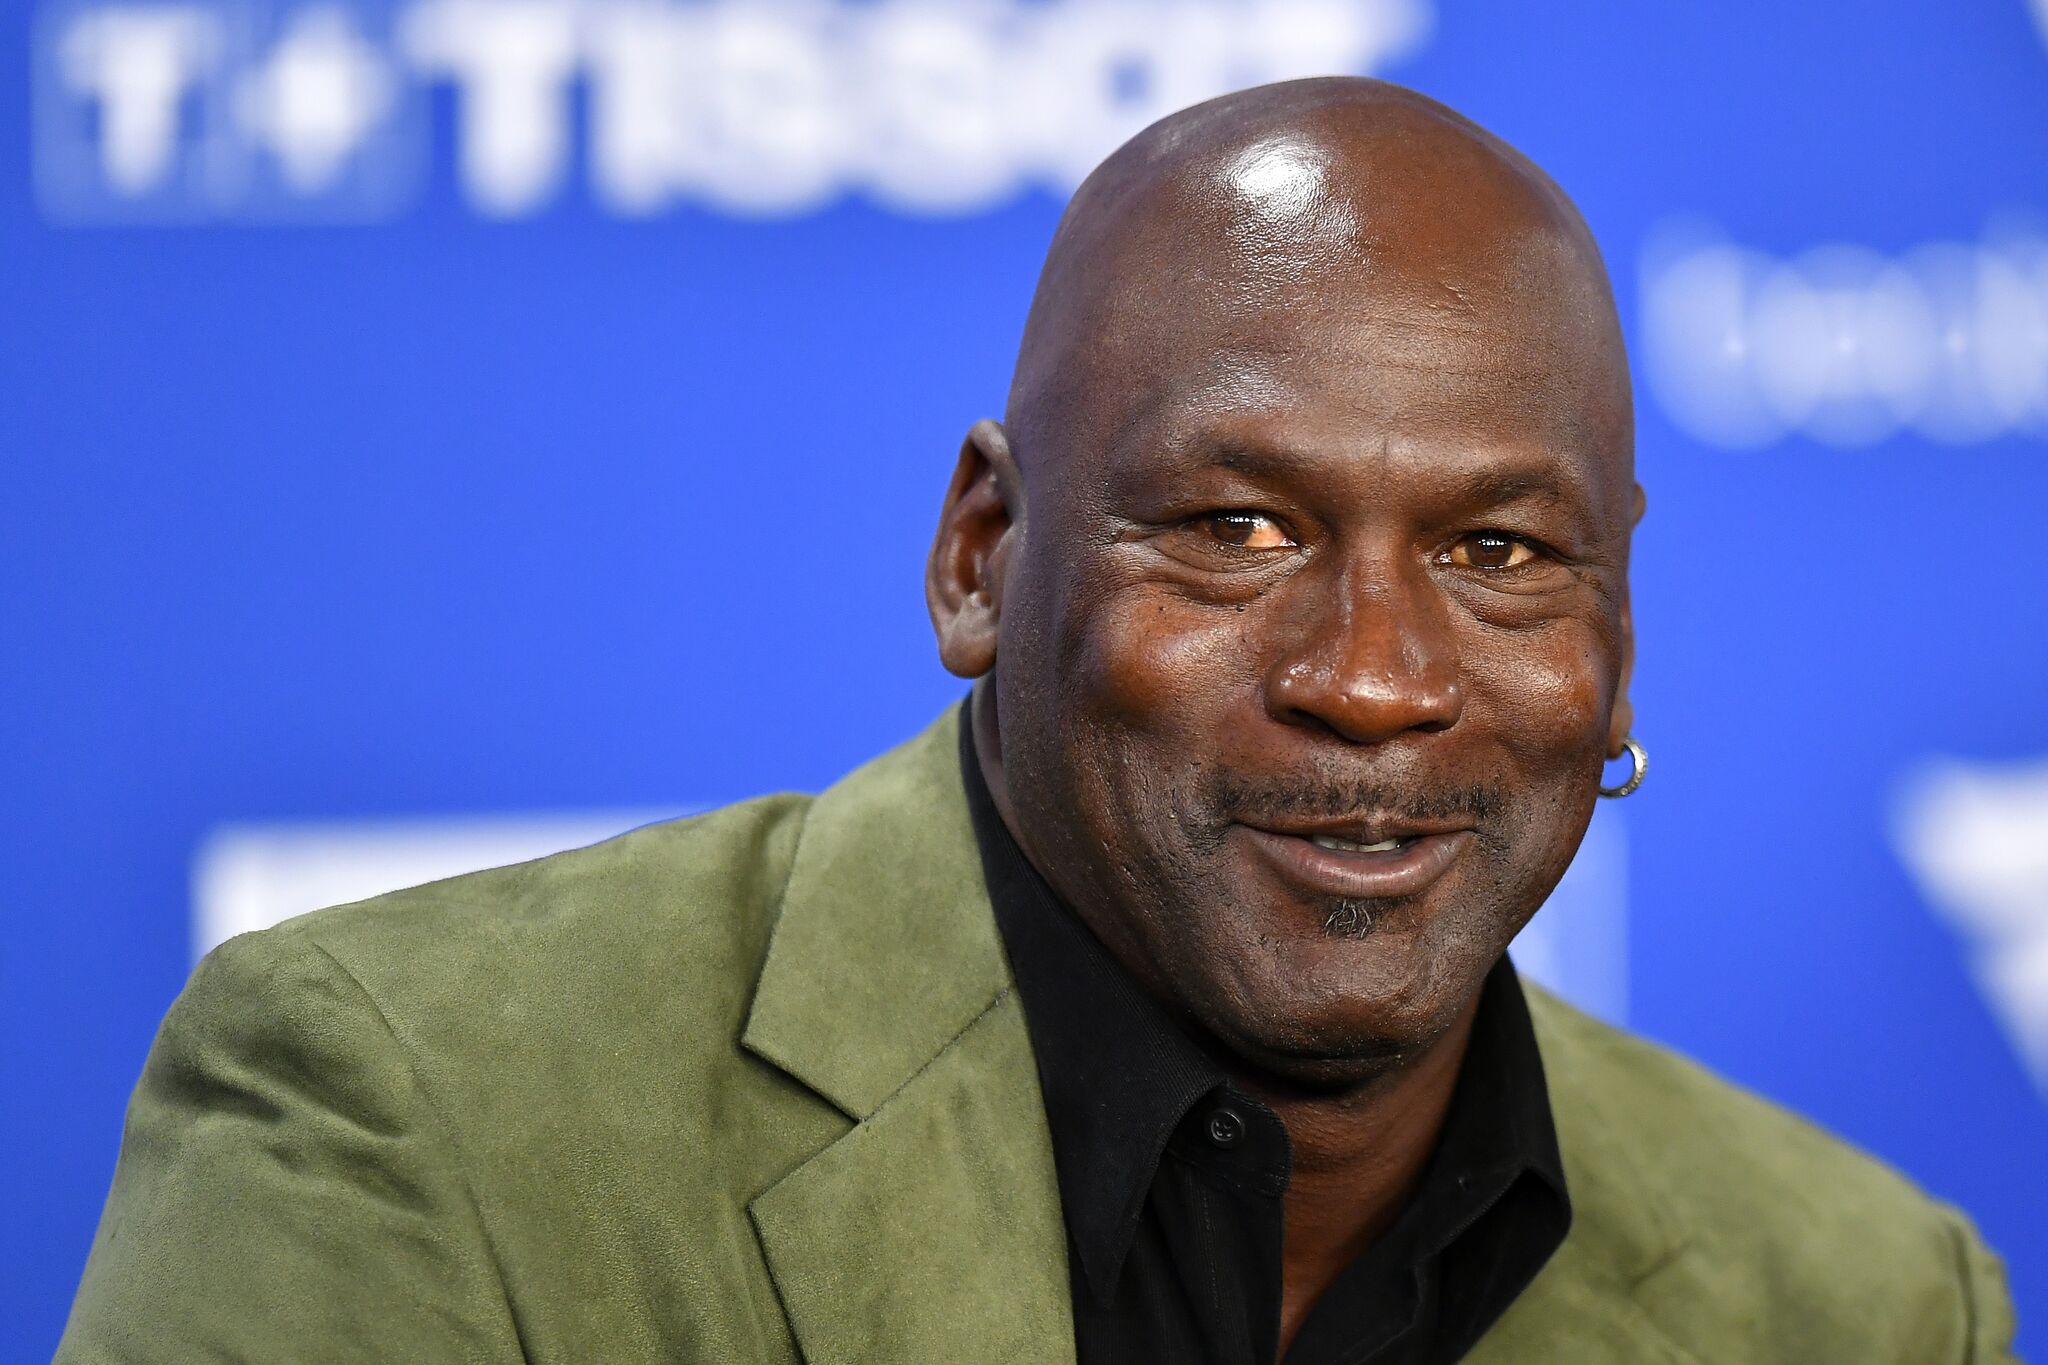  Michael Jordan at a press conference on January 24, 2020 in Paris, France | Photo: Getty Images